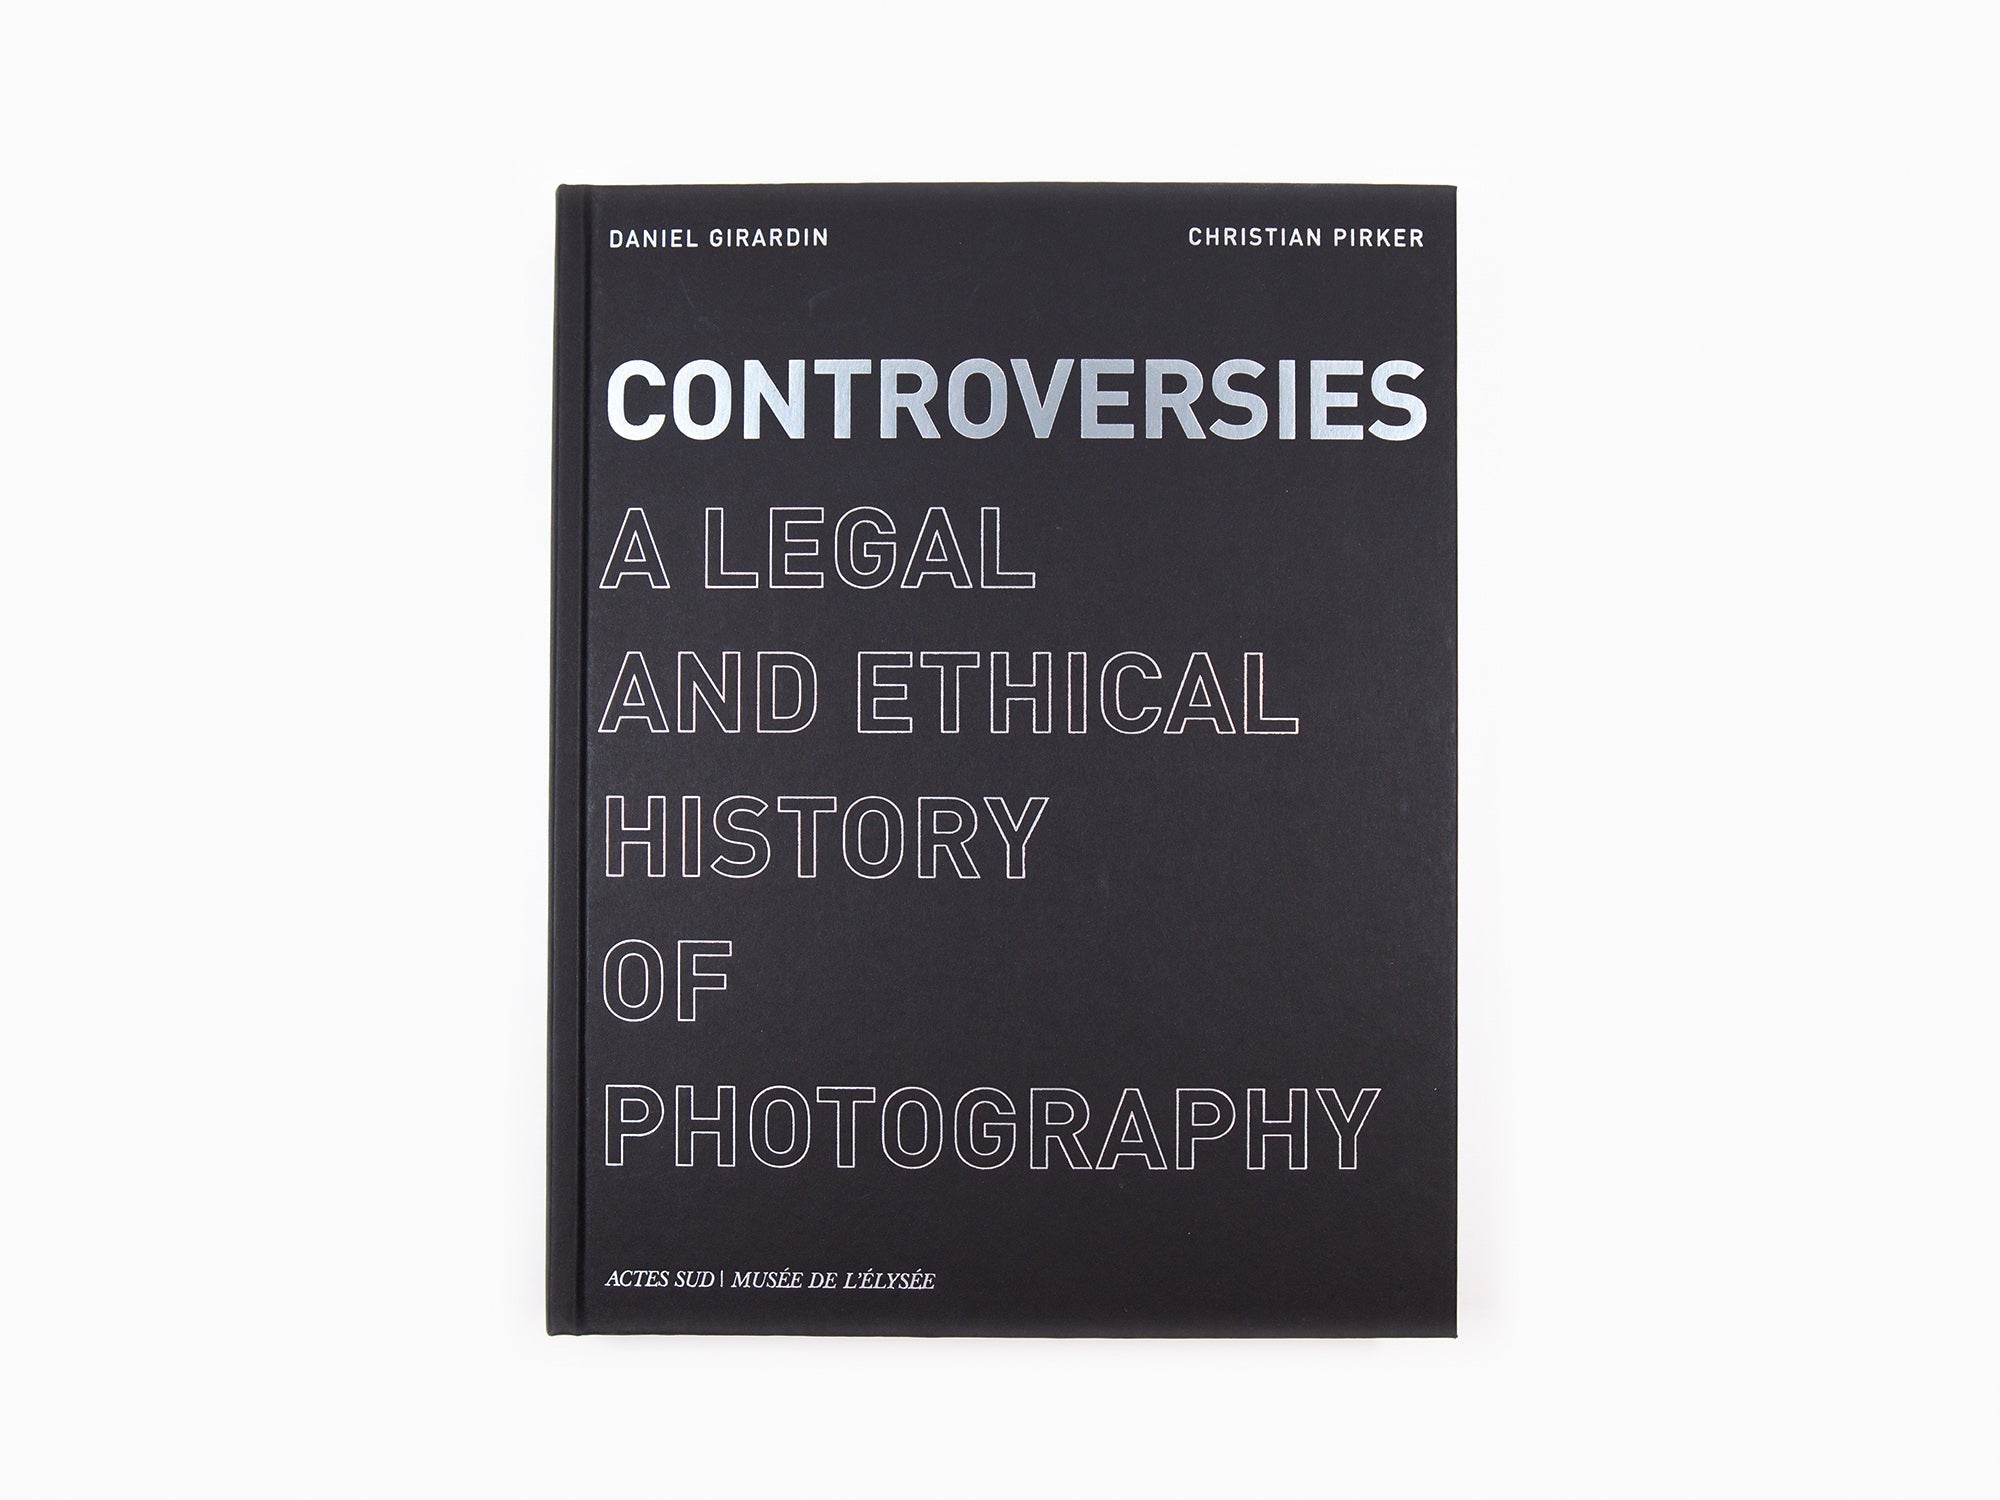 Controversies - A legal and ethical history of photography